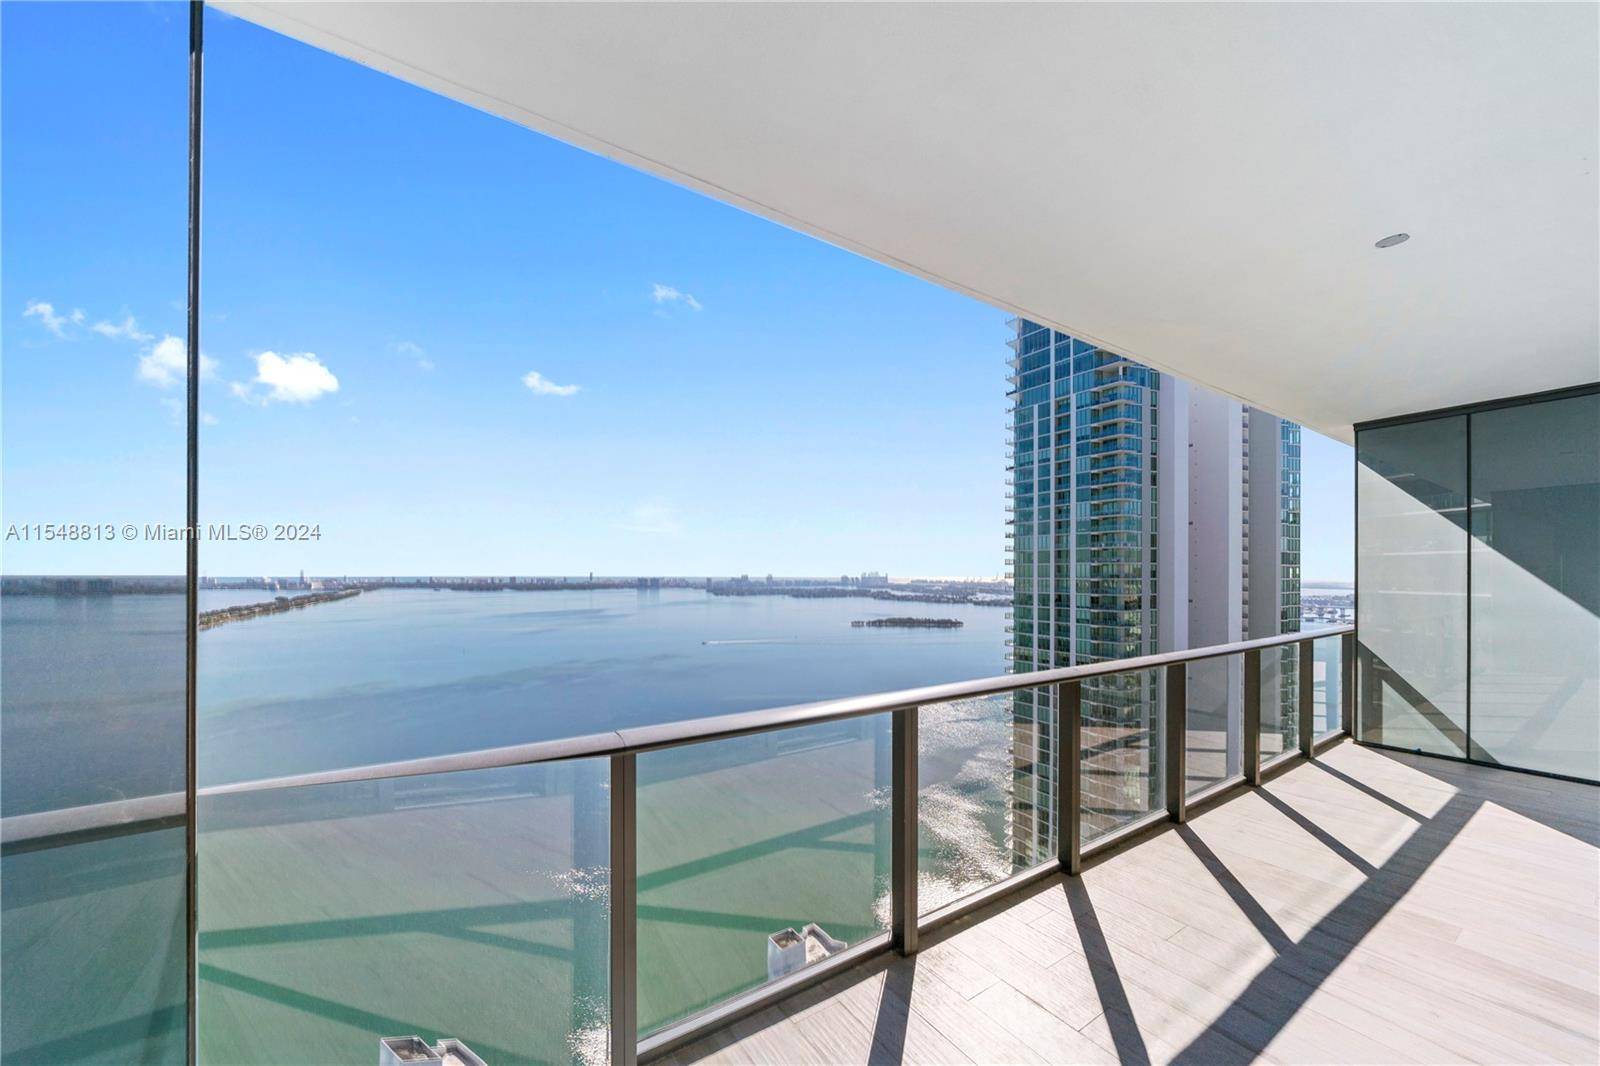 Experience endless panoramic bay and ocean views from the oversized balcony of this 1 bedroom, 2.